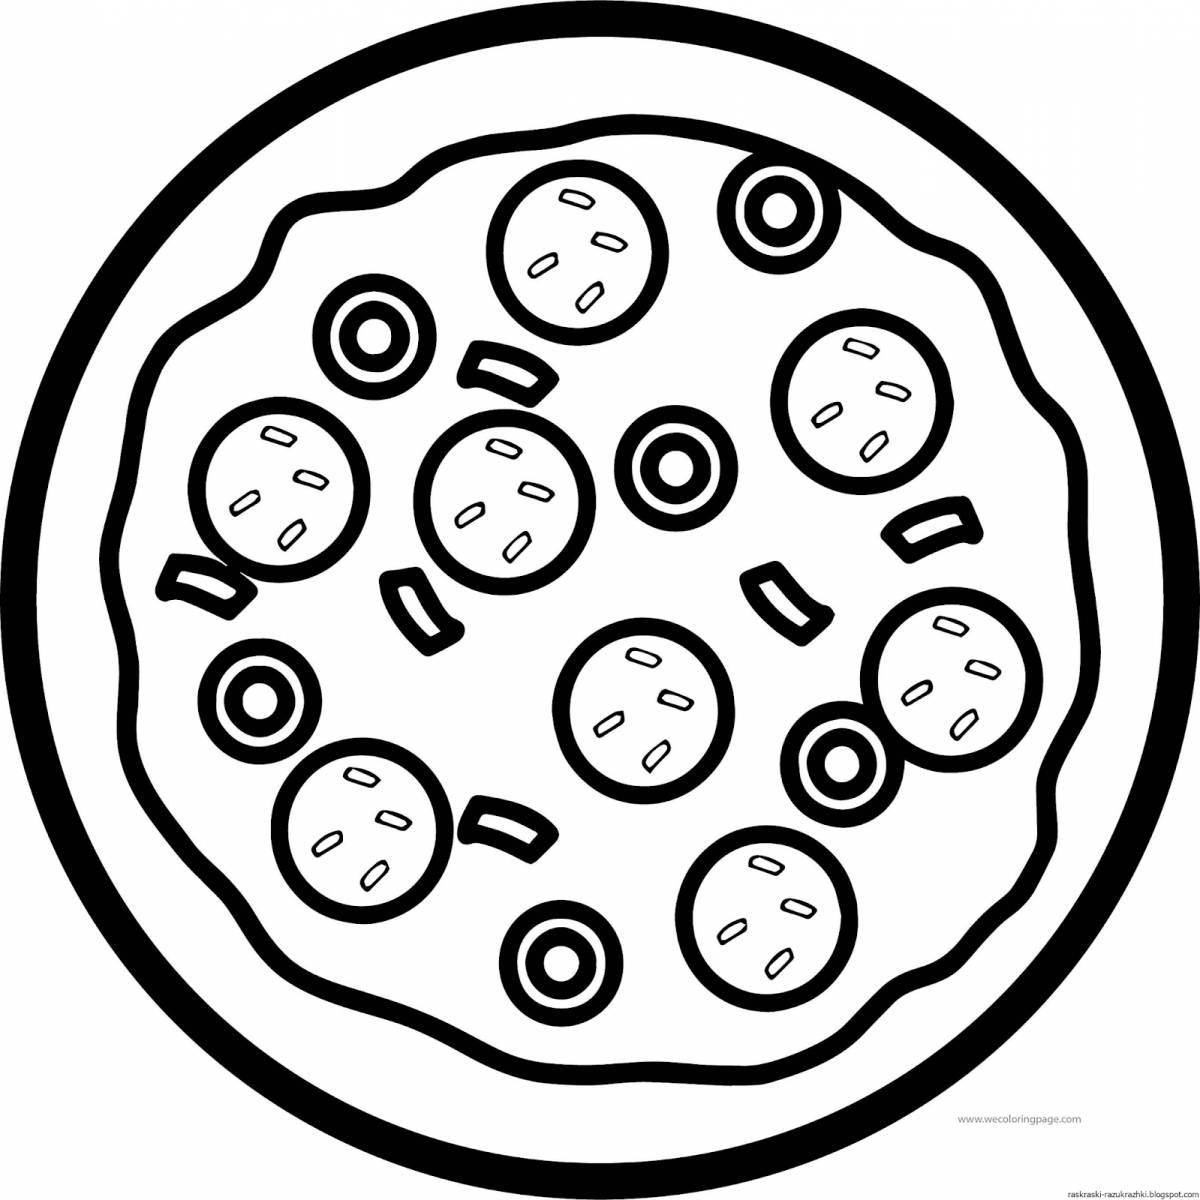 Spicy pepperoni pizza coloring book